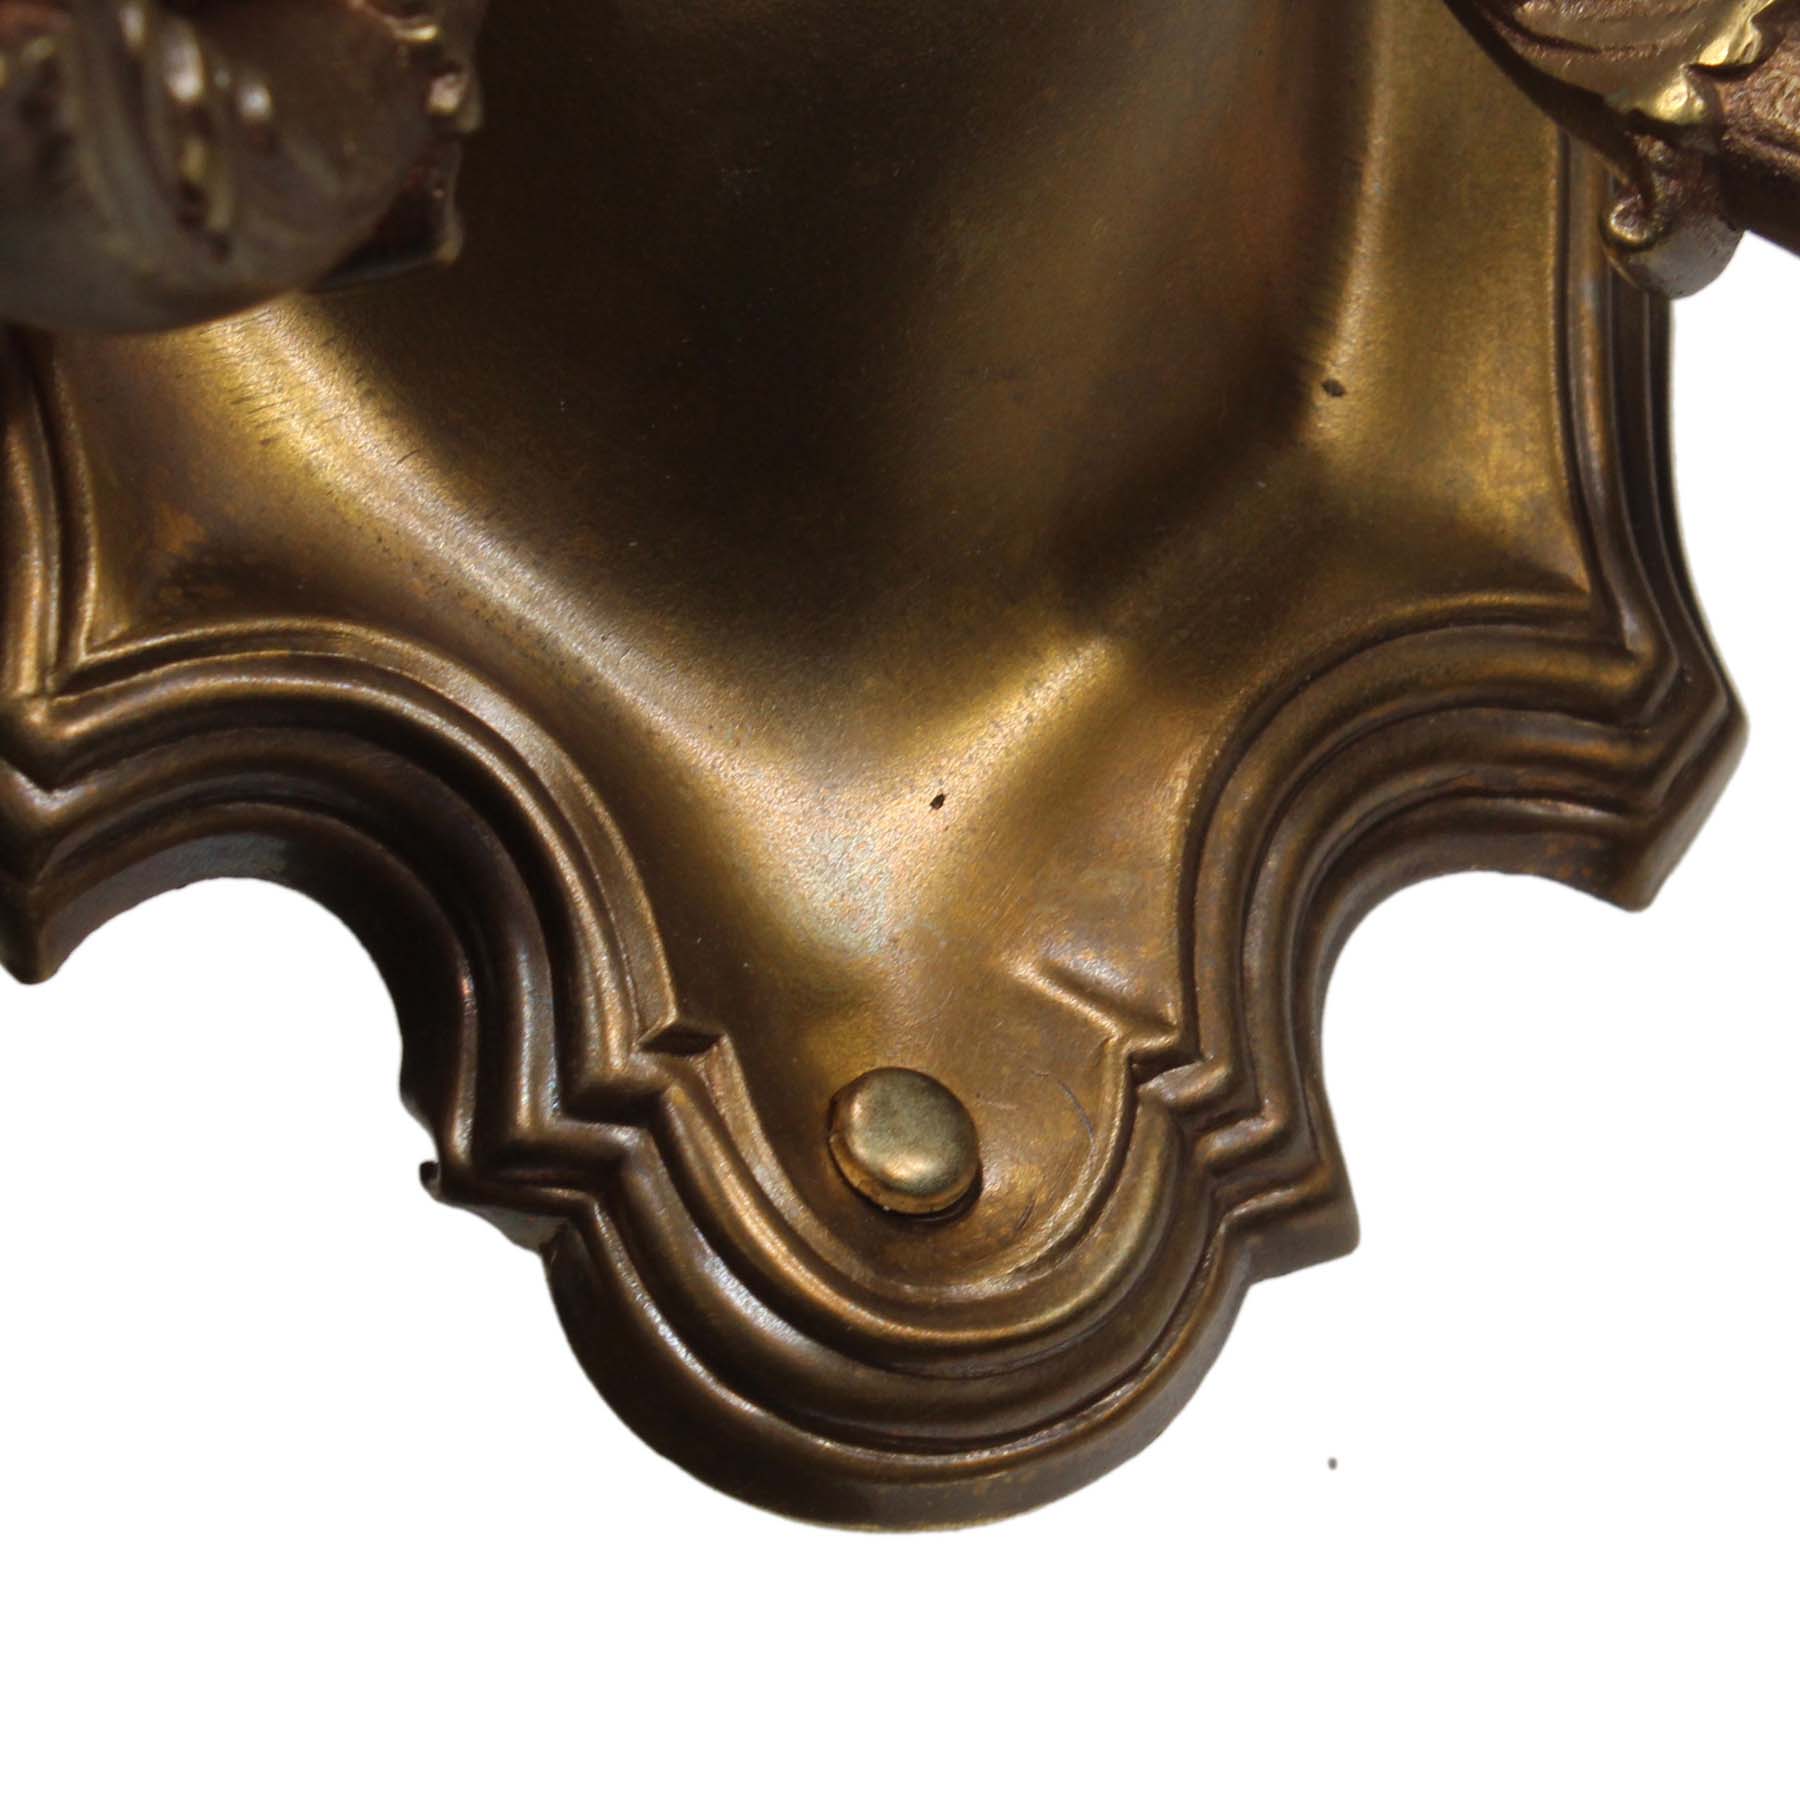 SOLD Set of Antique Double-Arm Sconces in Brass-69193